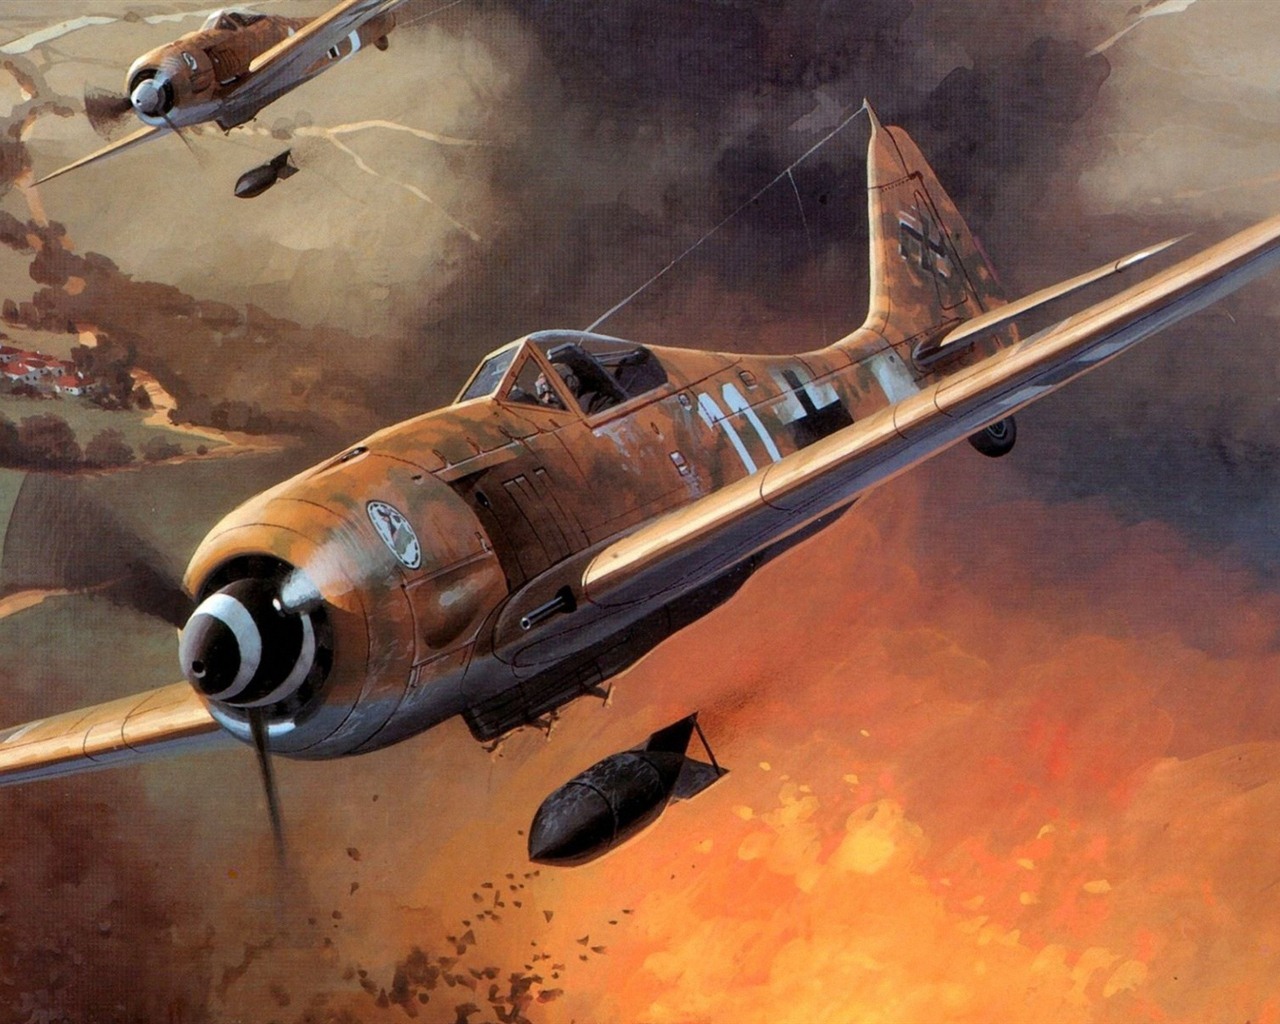 Military aircraft flight exquisite painting wallpapers #6 - 1280x1024